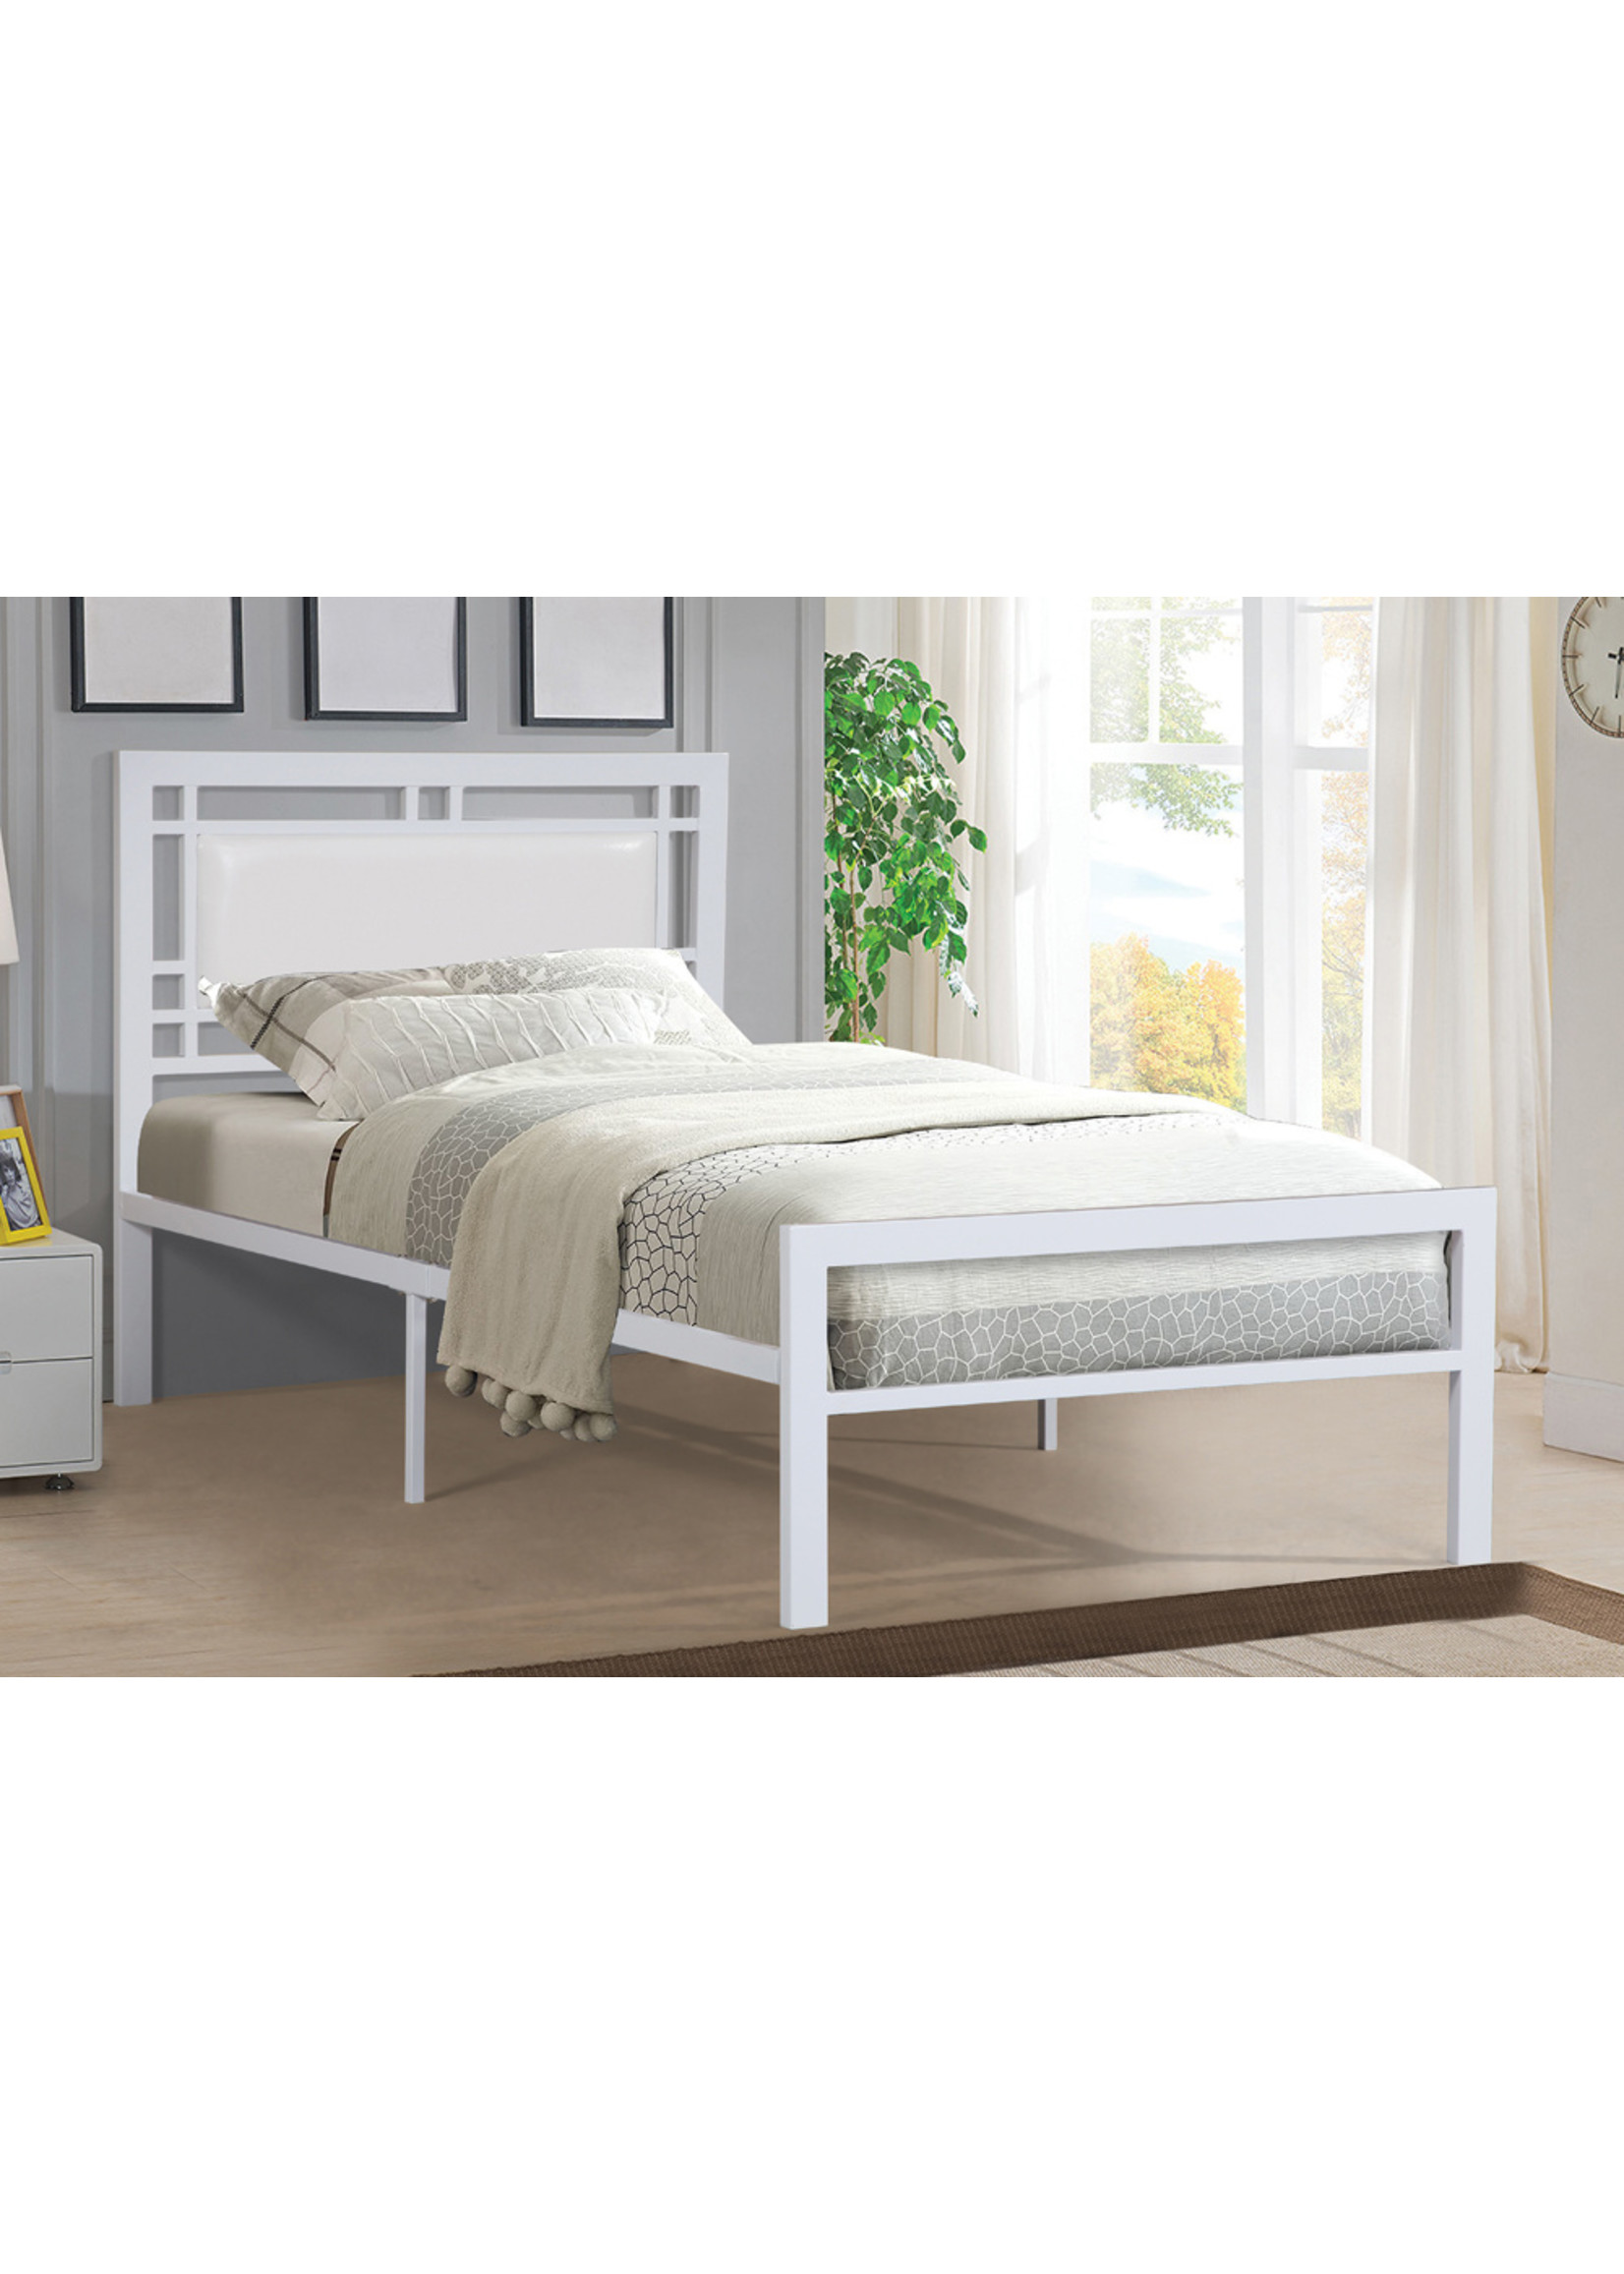 TWIN WHITE METAL BED FRAME